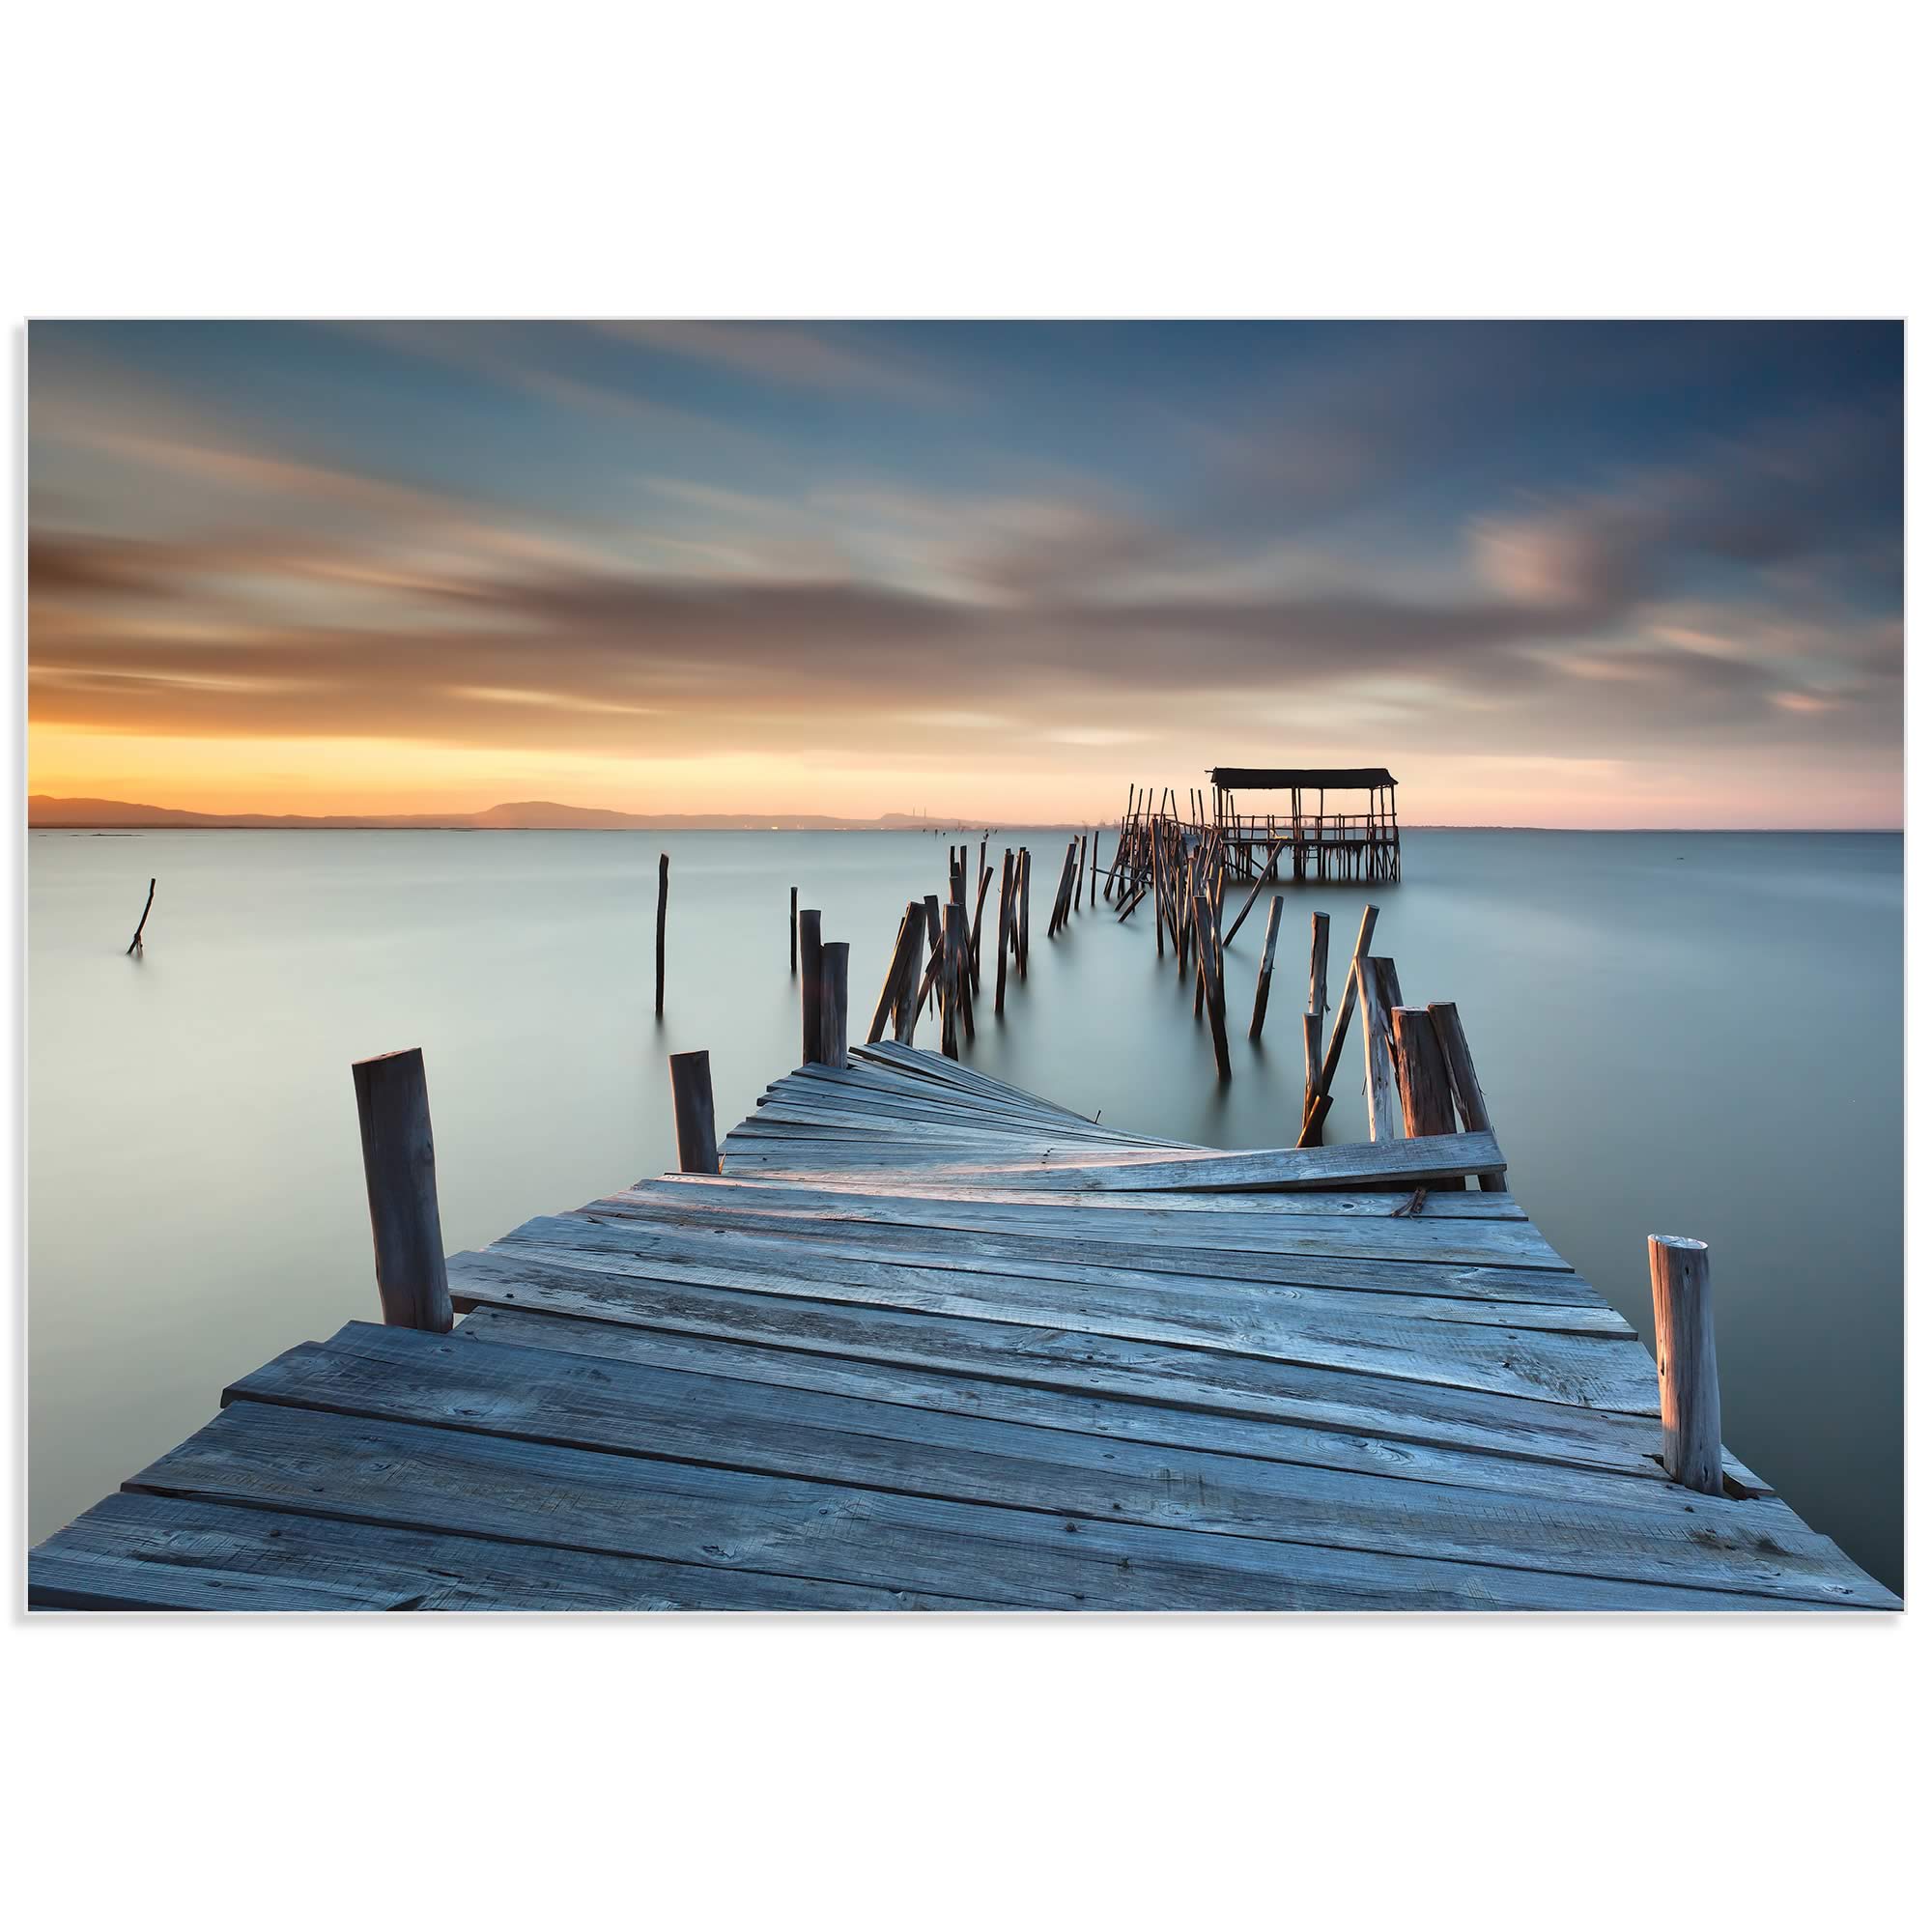 Collapsed Dock by Rui David - Beach Art on Metal or Acrylic - Alternate View 2